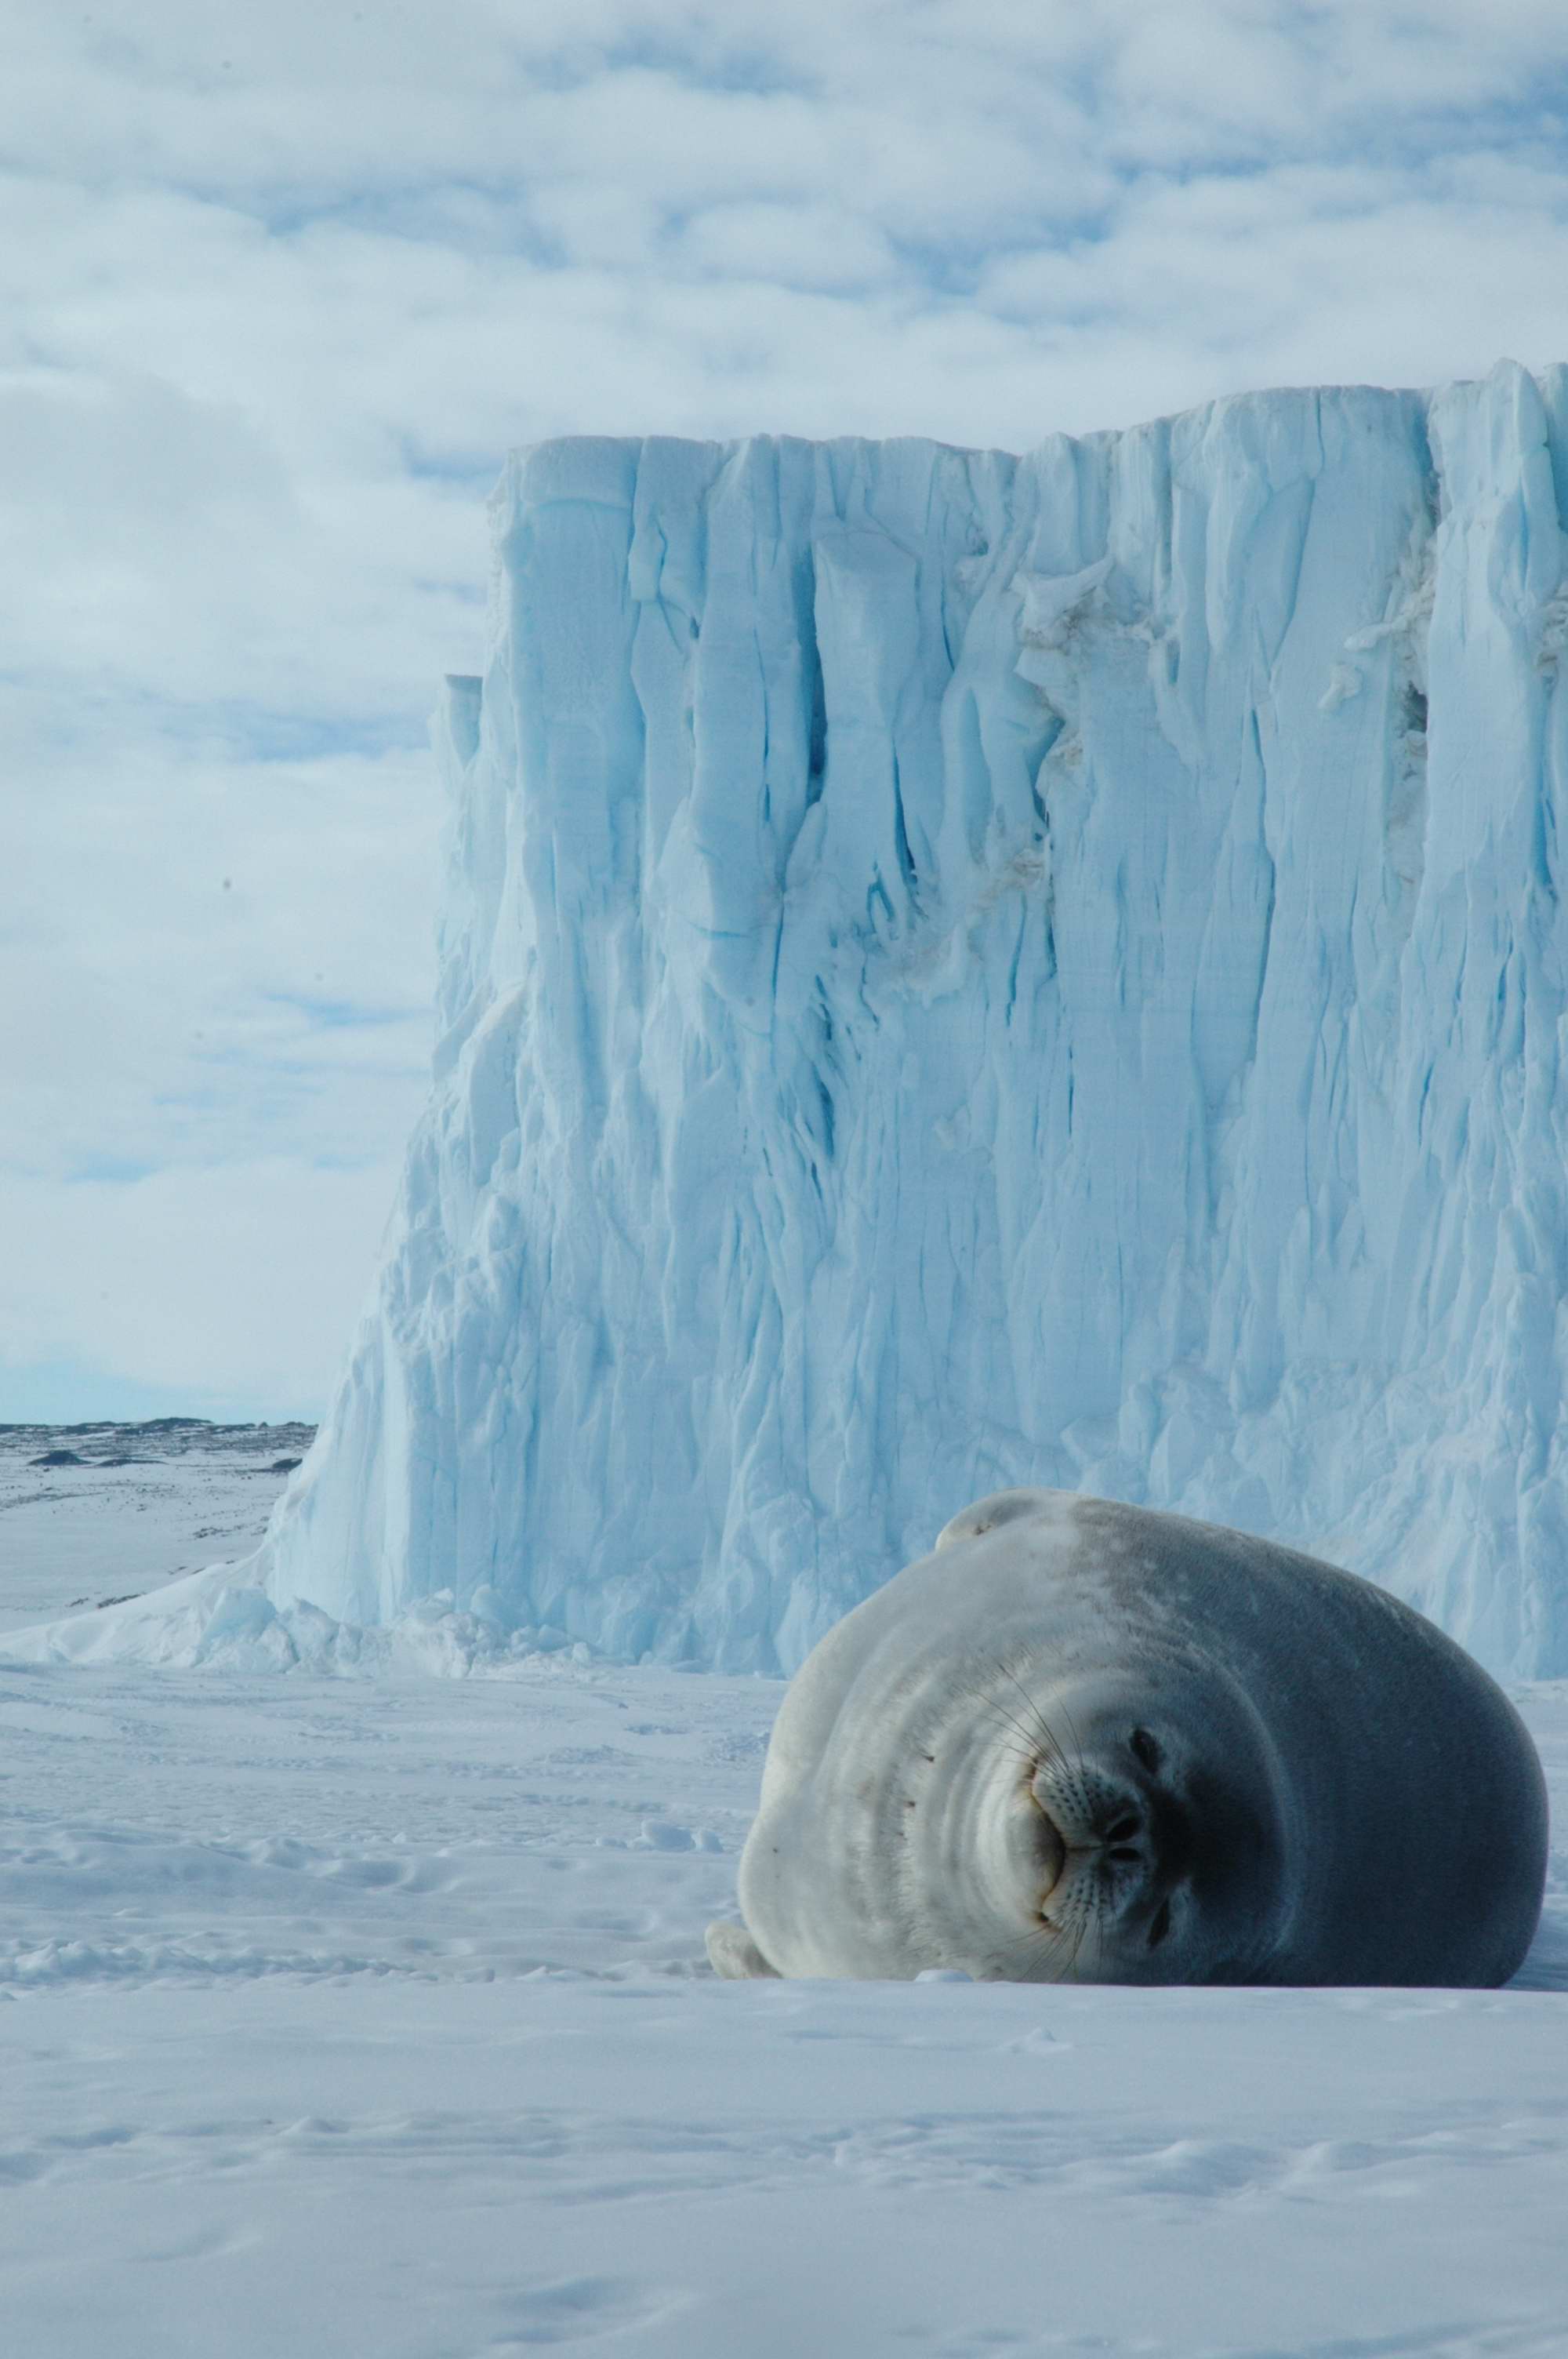  A Weddell seal chillaxing on the sea ice in front of the Barne Glacier. 